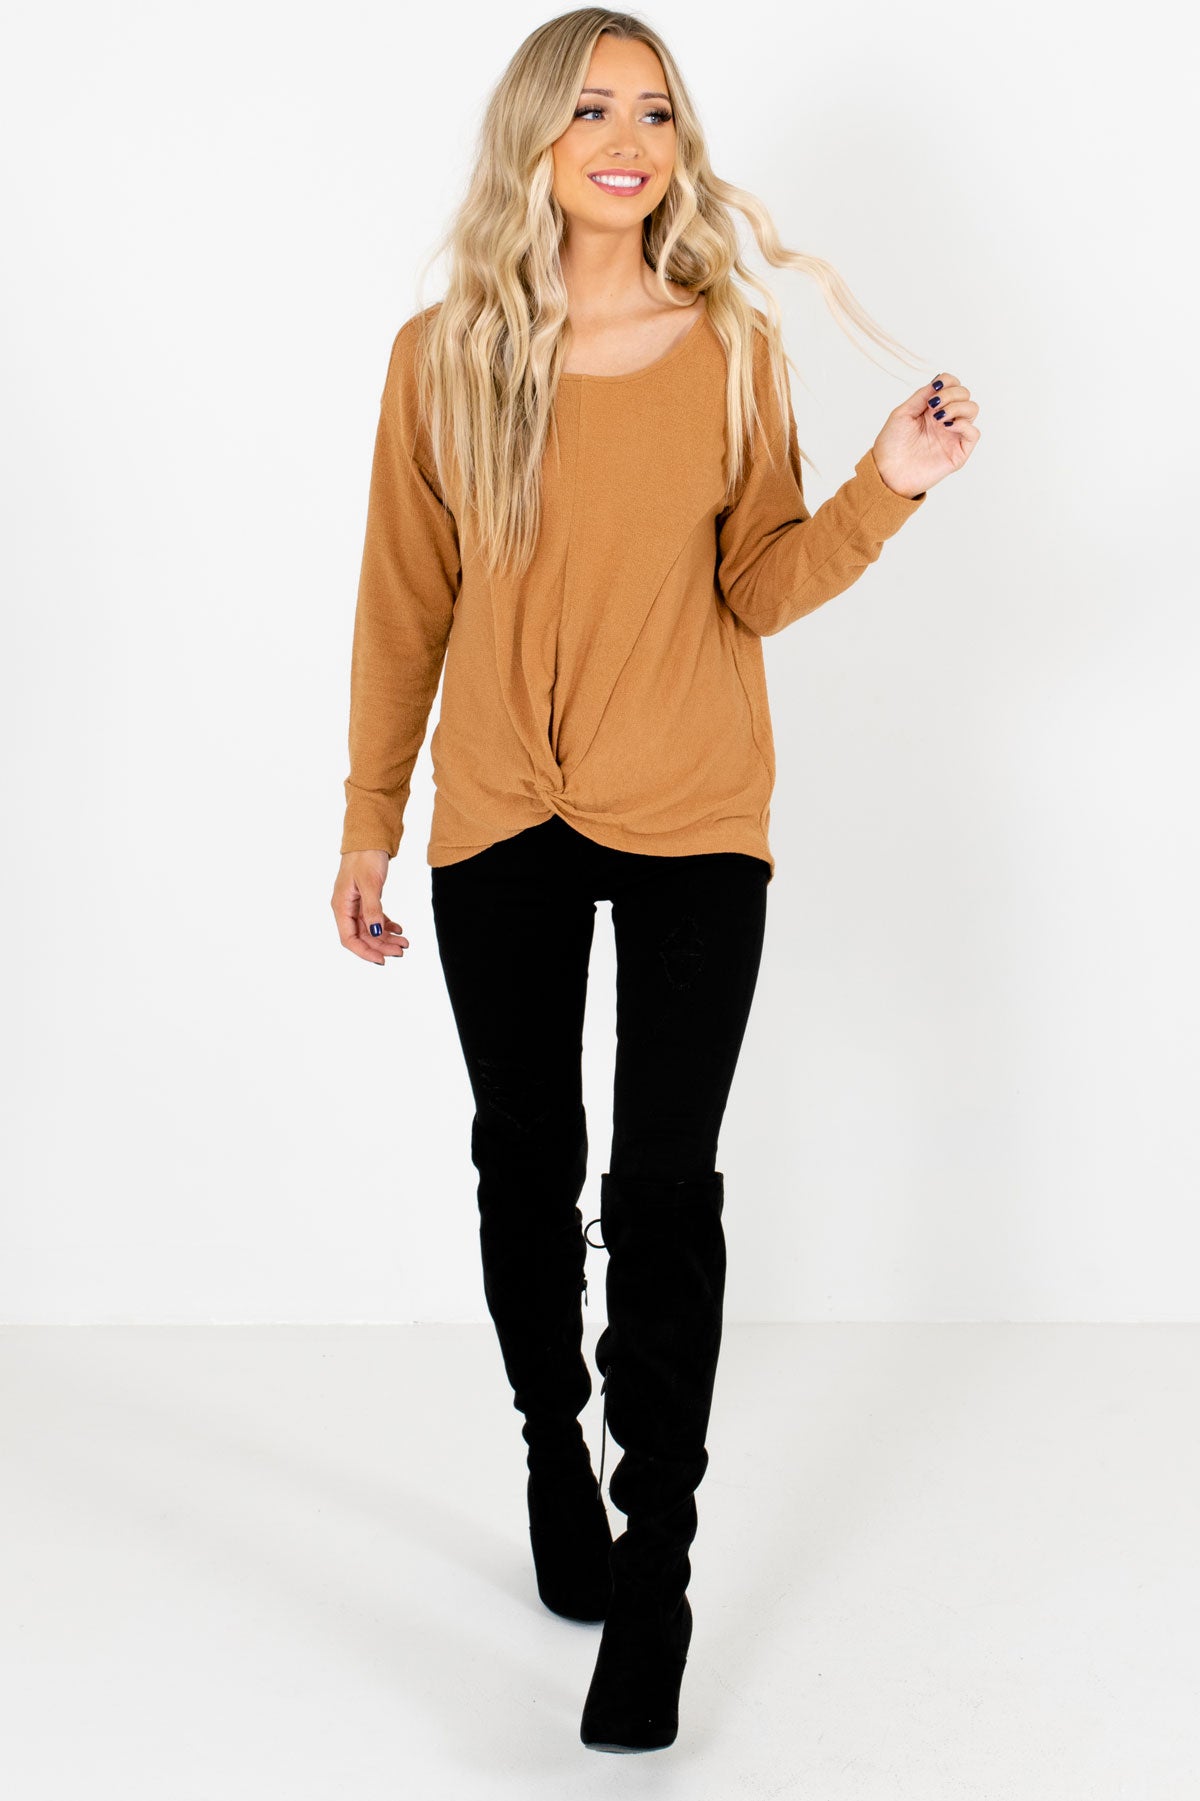 Women's Mustard Fall and Winter Boutique Clothing